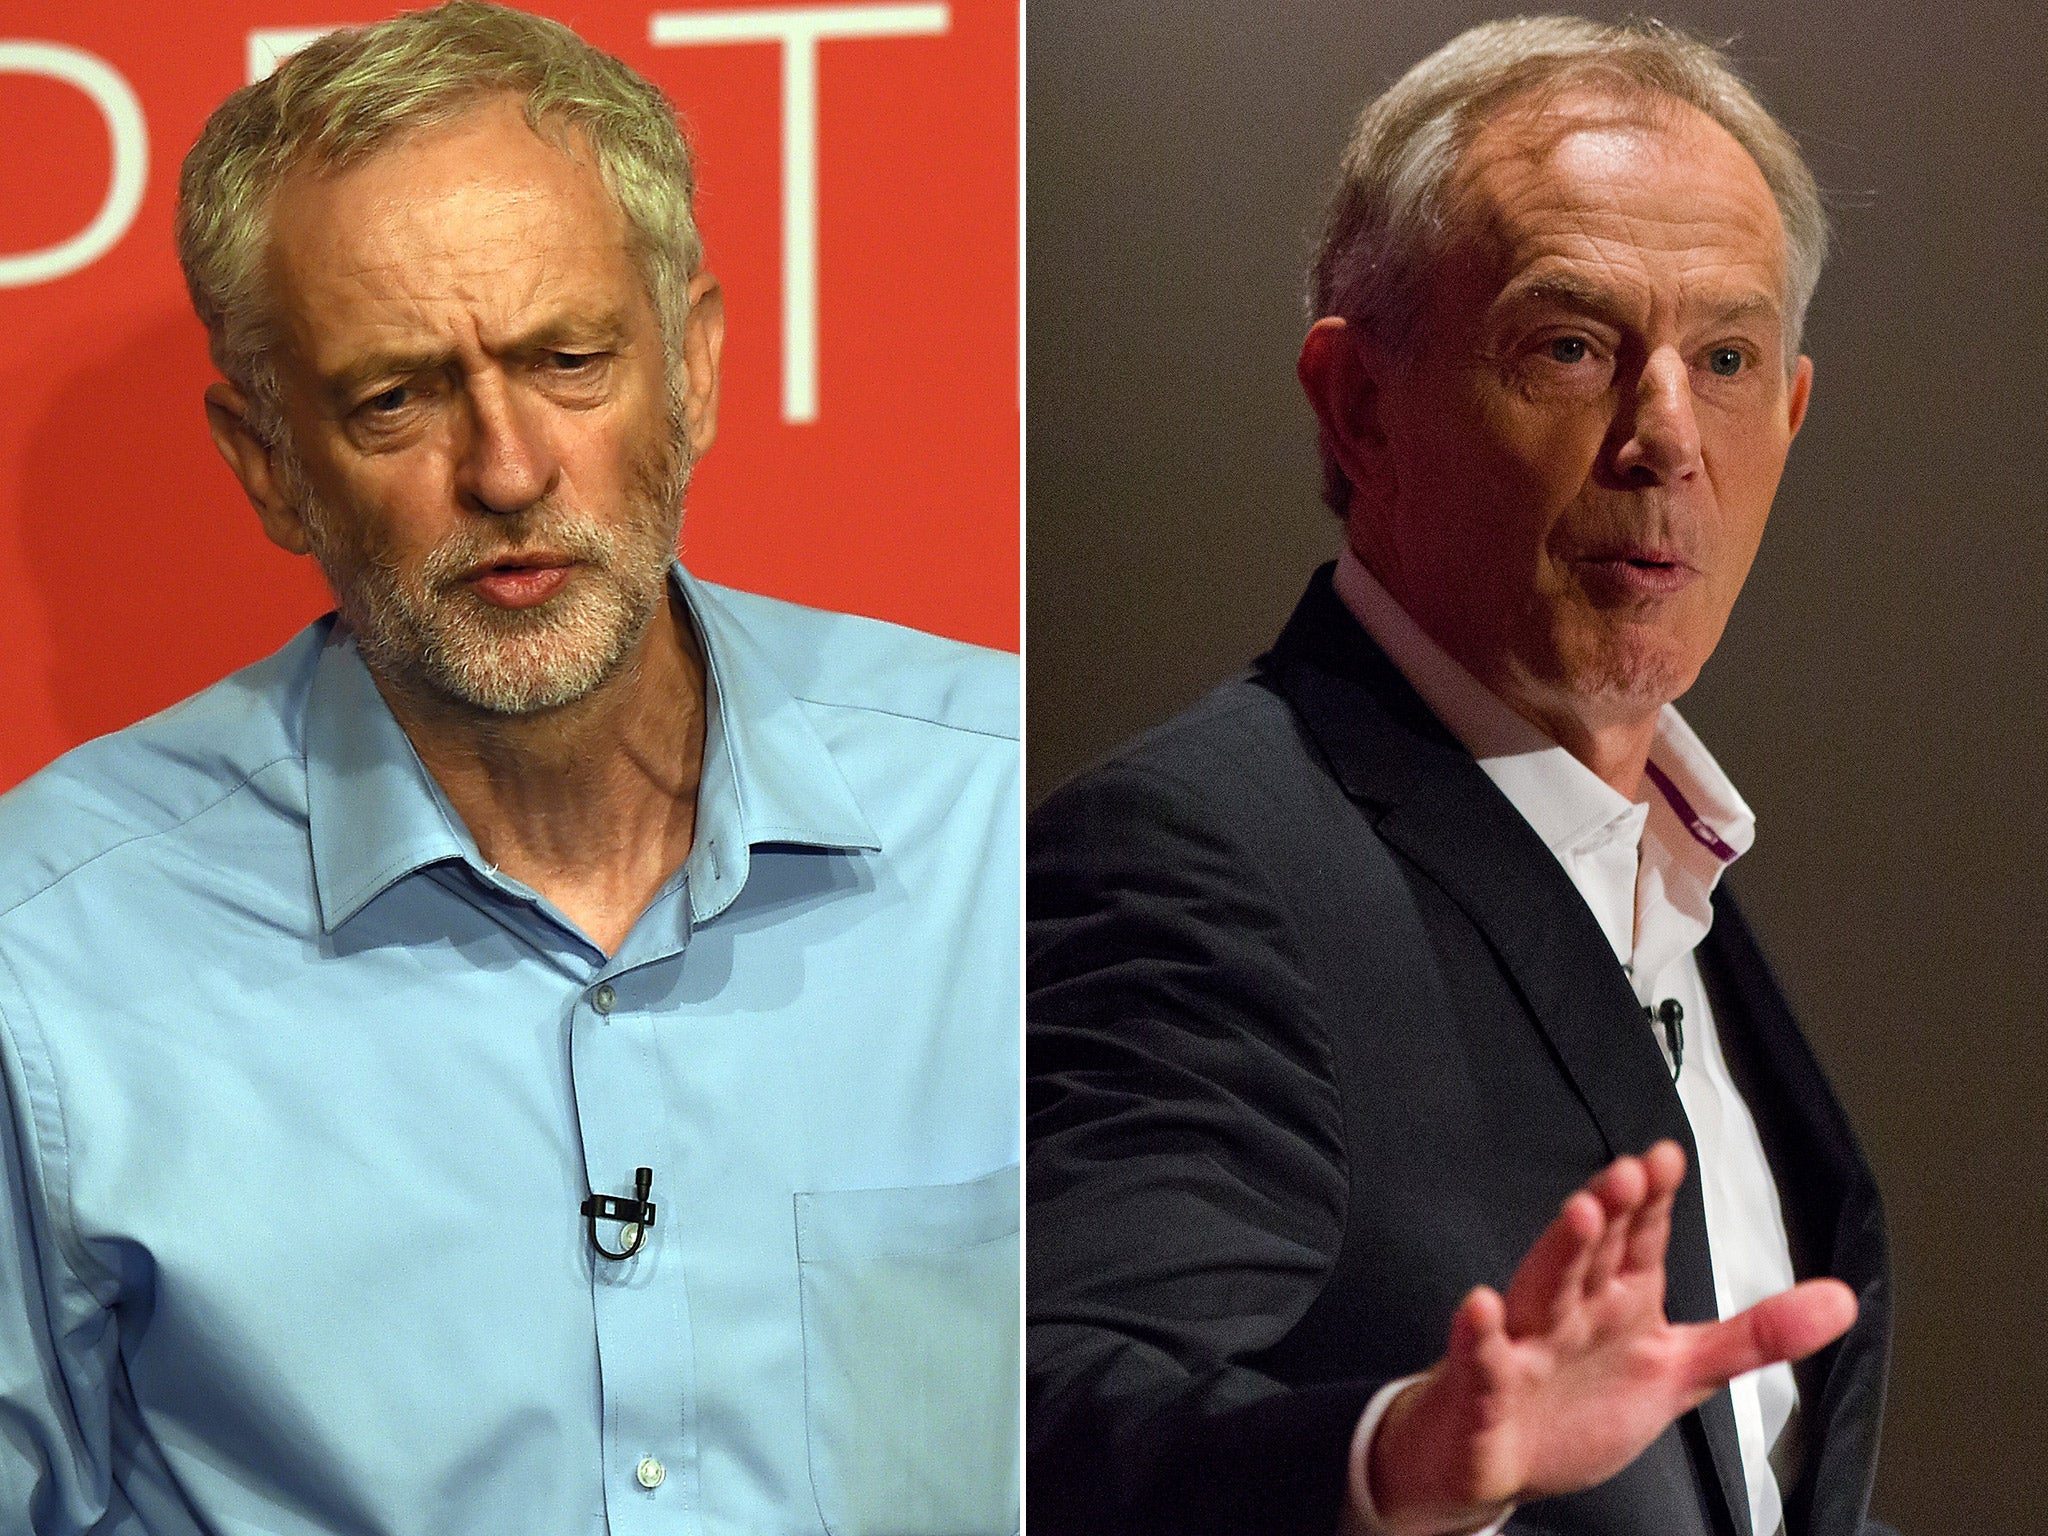 Labour leadership contender Jeremy Corbyn and the party's former Prime Minister, Tony Blair